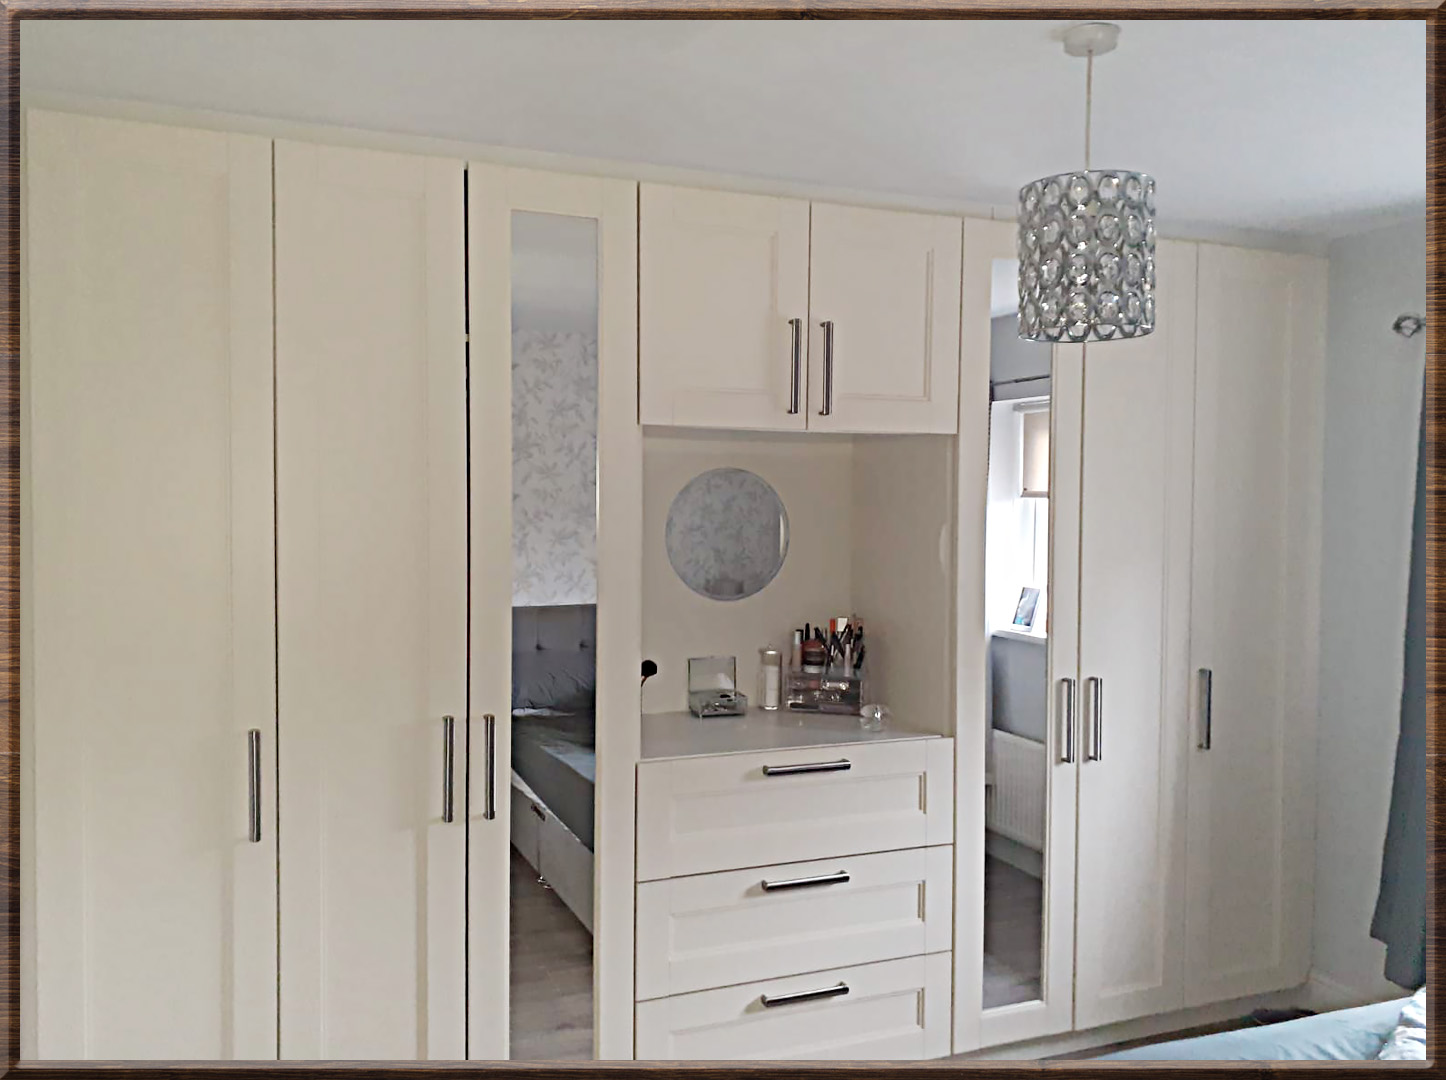 BG Carpentry Services fitted wardrobes